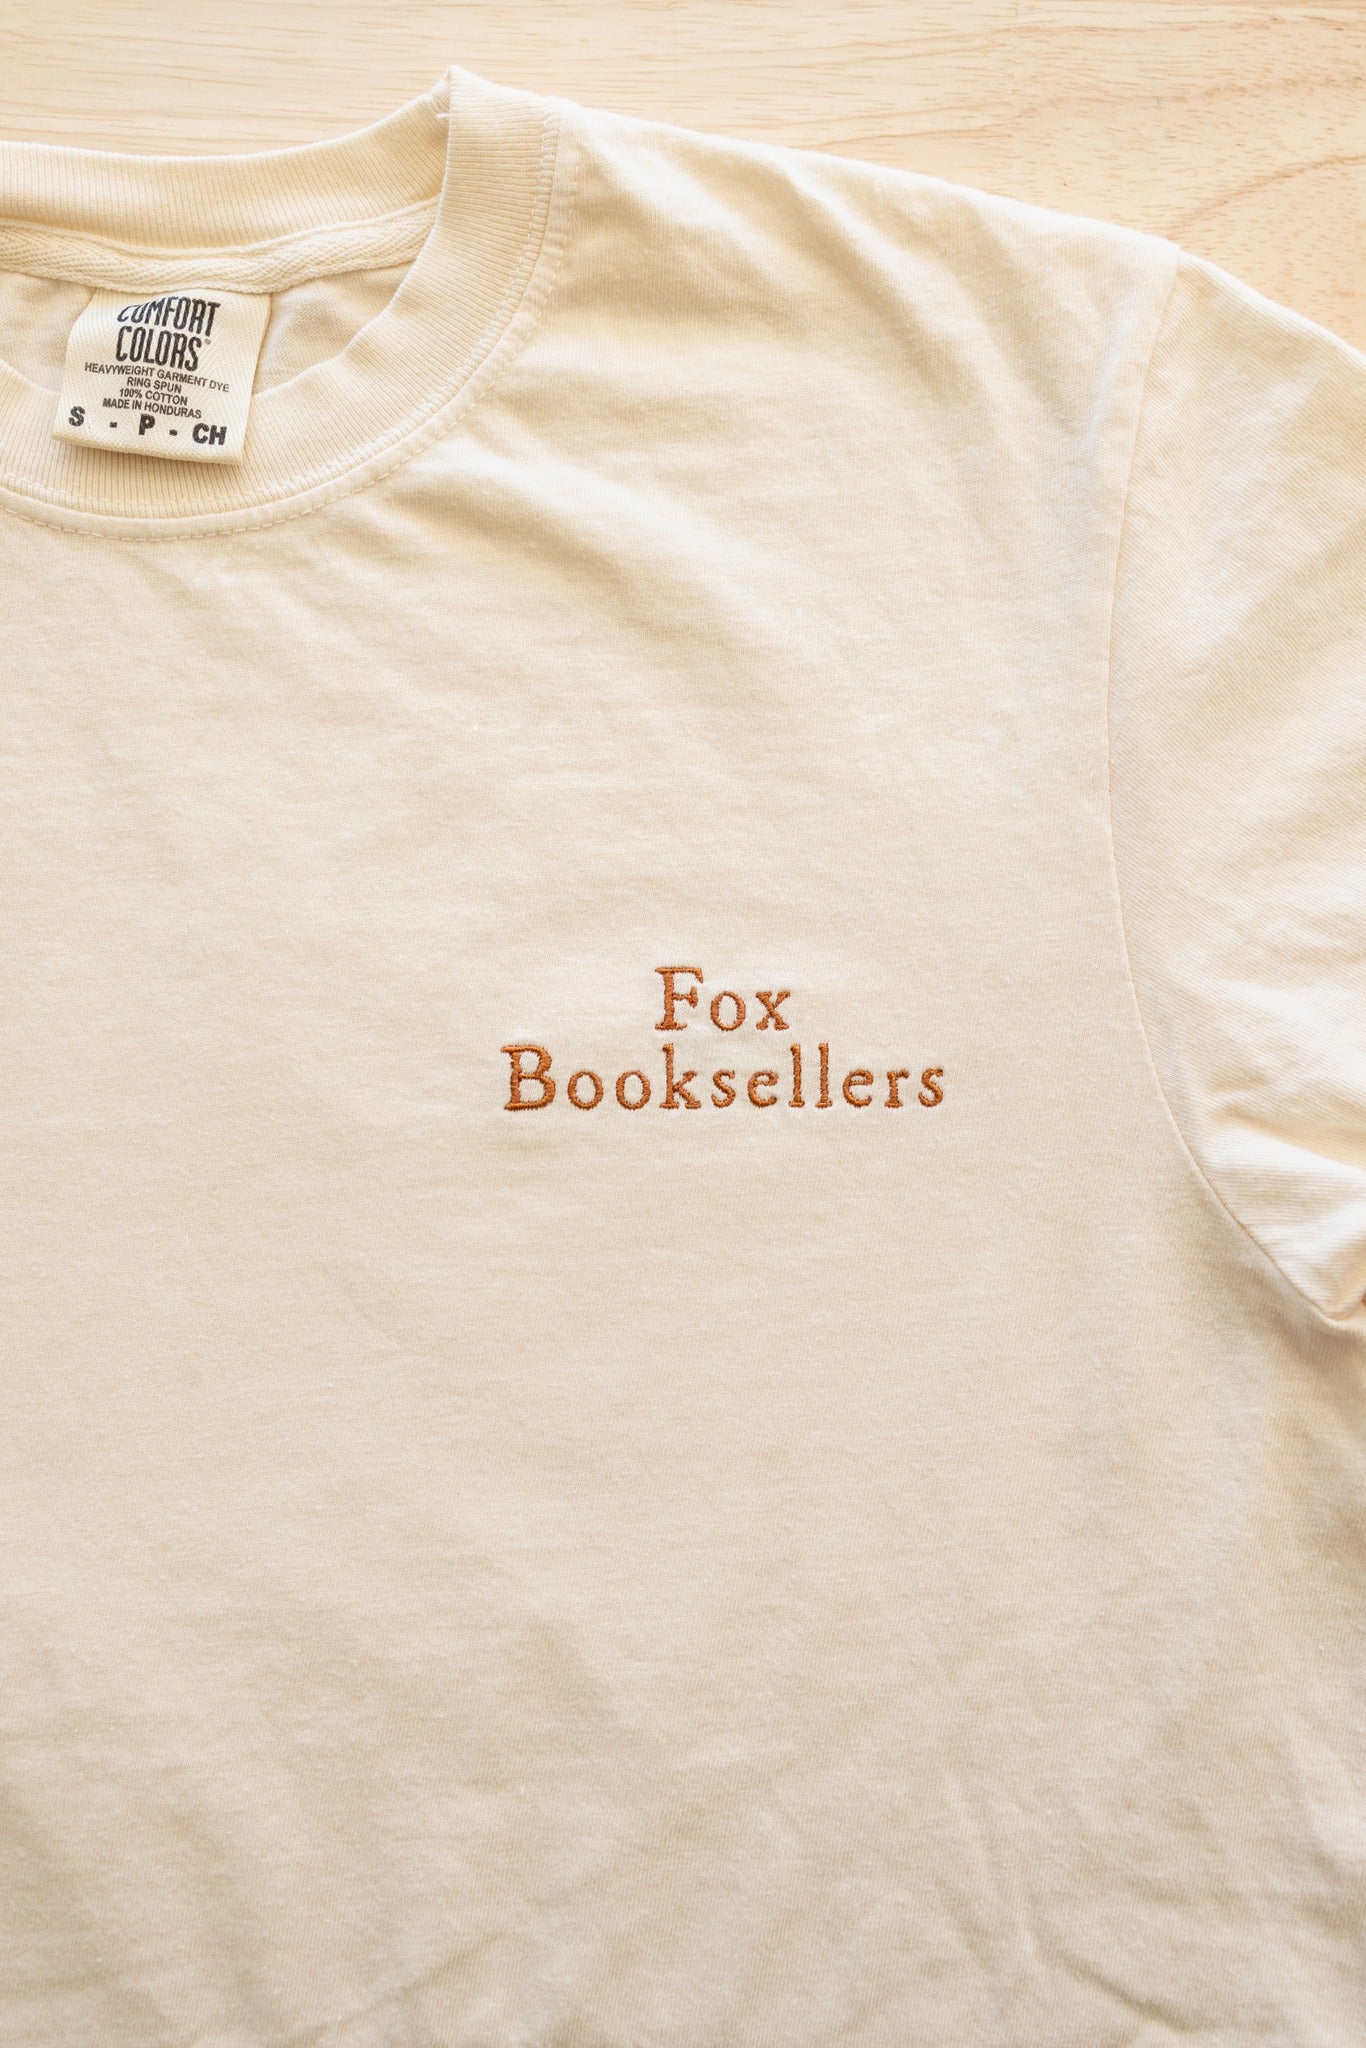 Comfort Color Fox Booksellers Letter Shirt